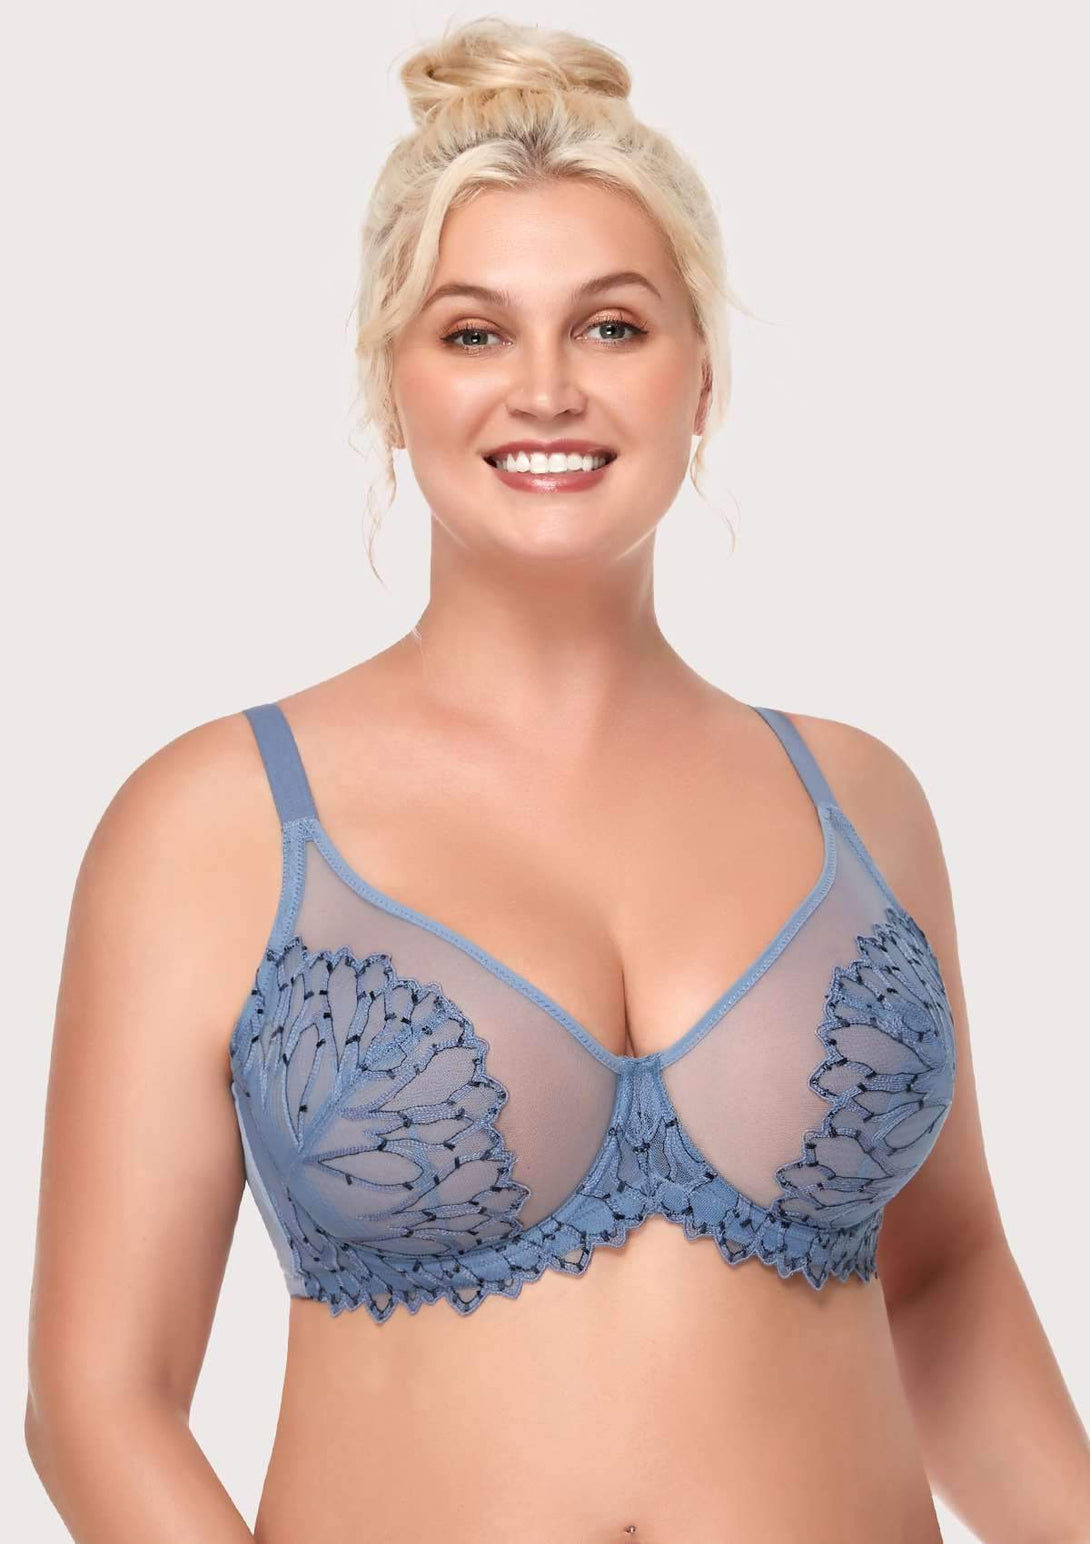  Womens Plus Size Bras Full Coverage Lace Underwire Unlined  Bra Blueberry 32D